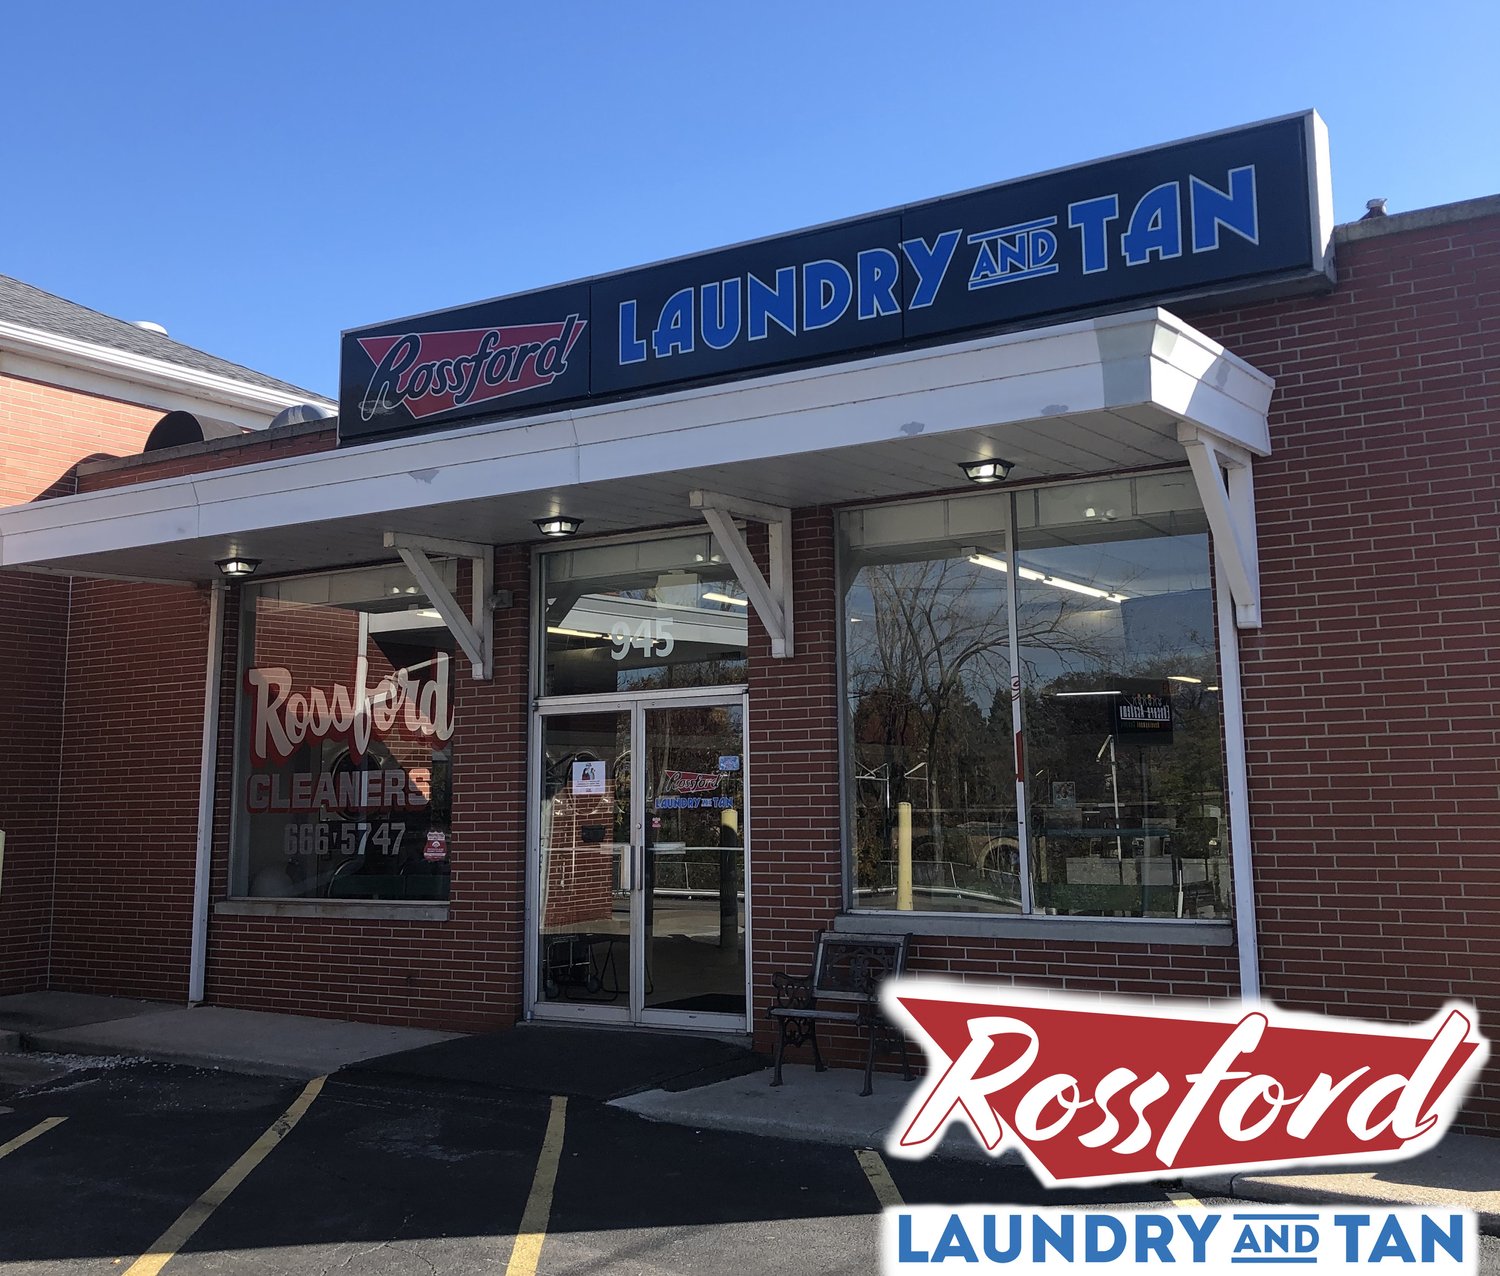 Rossford Laundry &amp; Tan